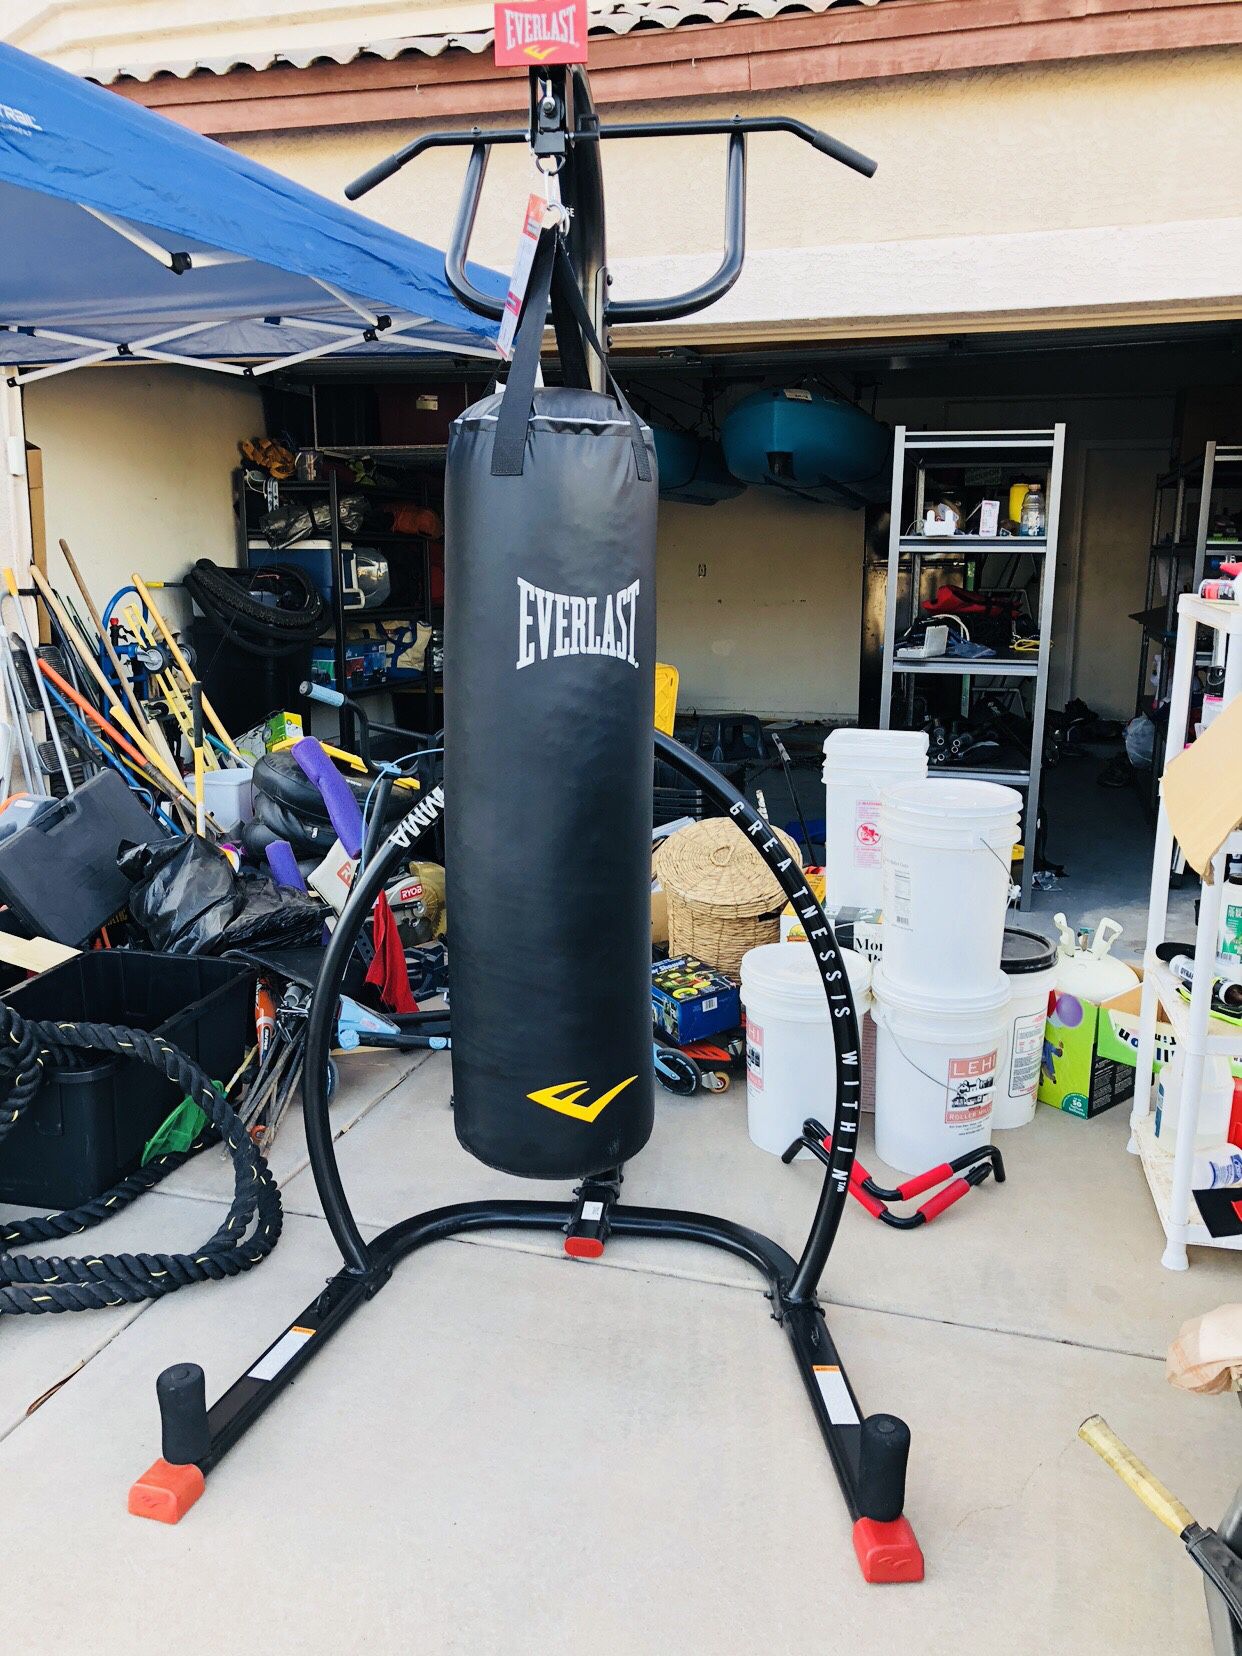 Everlast heavy bag stand with pull up and push up bars as well as 100lb heavy bag, weighted sand bags, and his & her gloves.